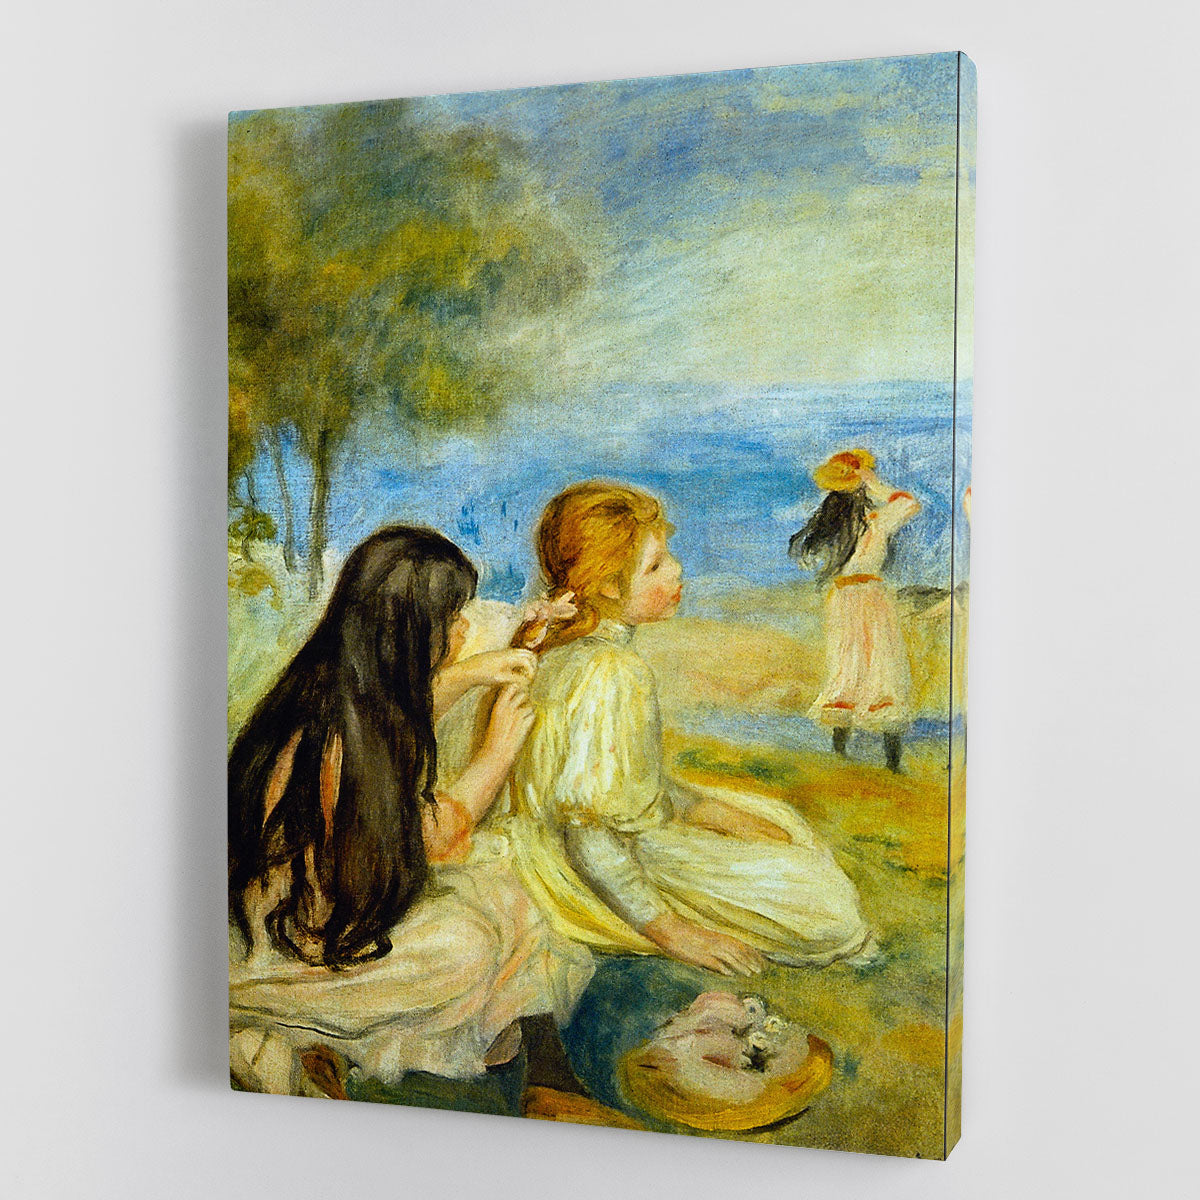 Girls by the Seaside by Renoir Canvas Print or Poster - Canvas Art Rocks - 1